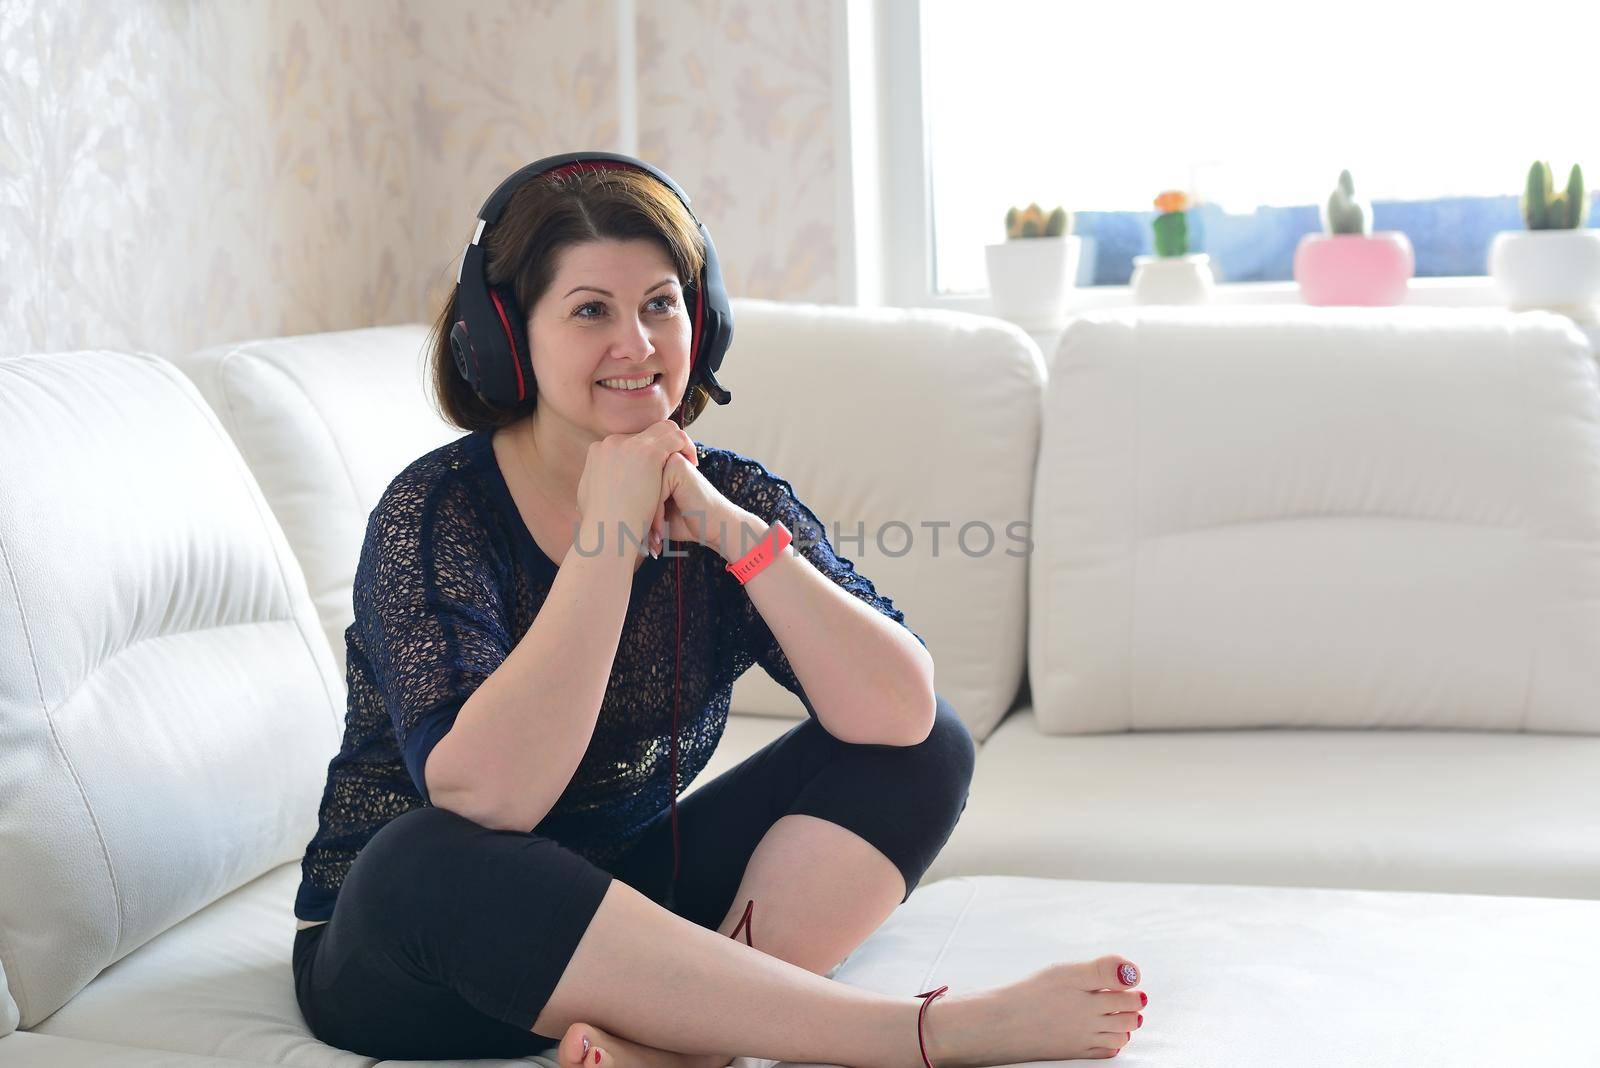 Woman in headphones listening to music while sitting on couch by olgavolodina